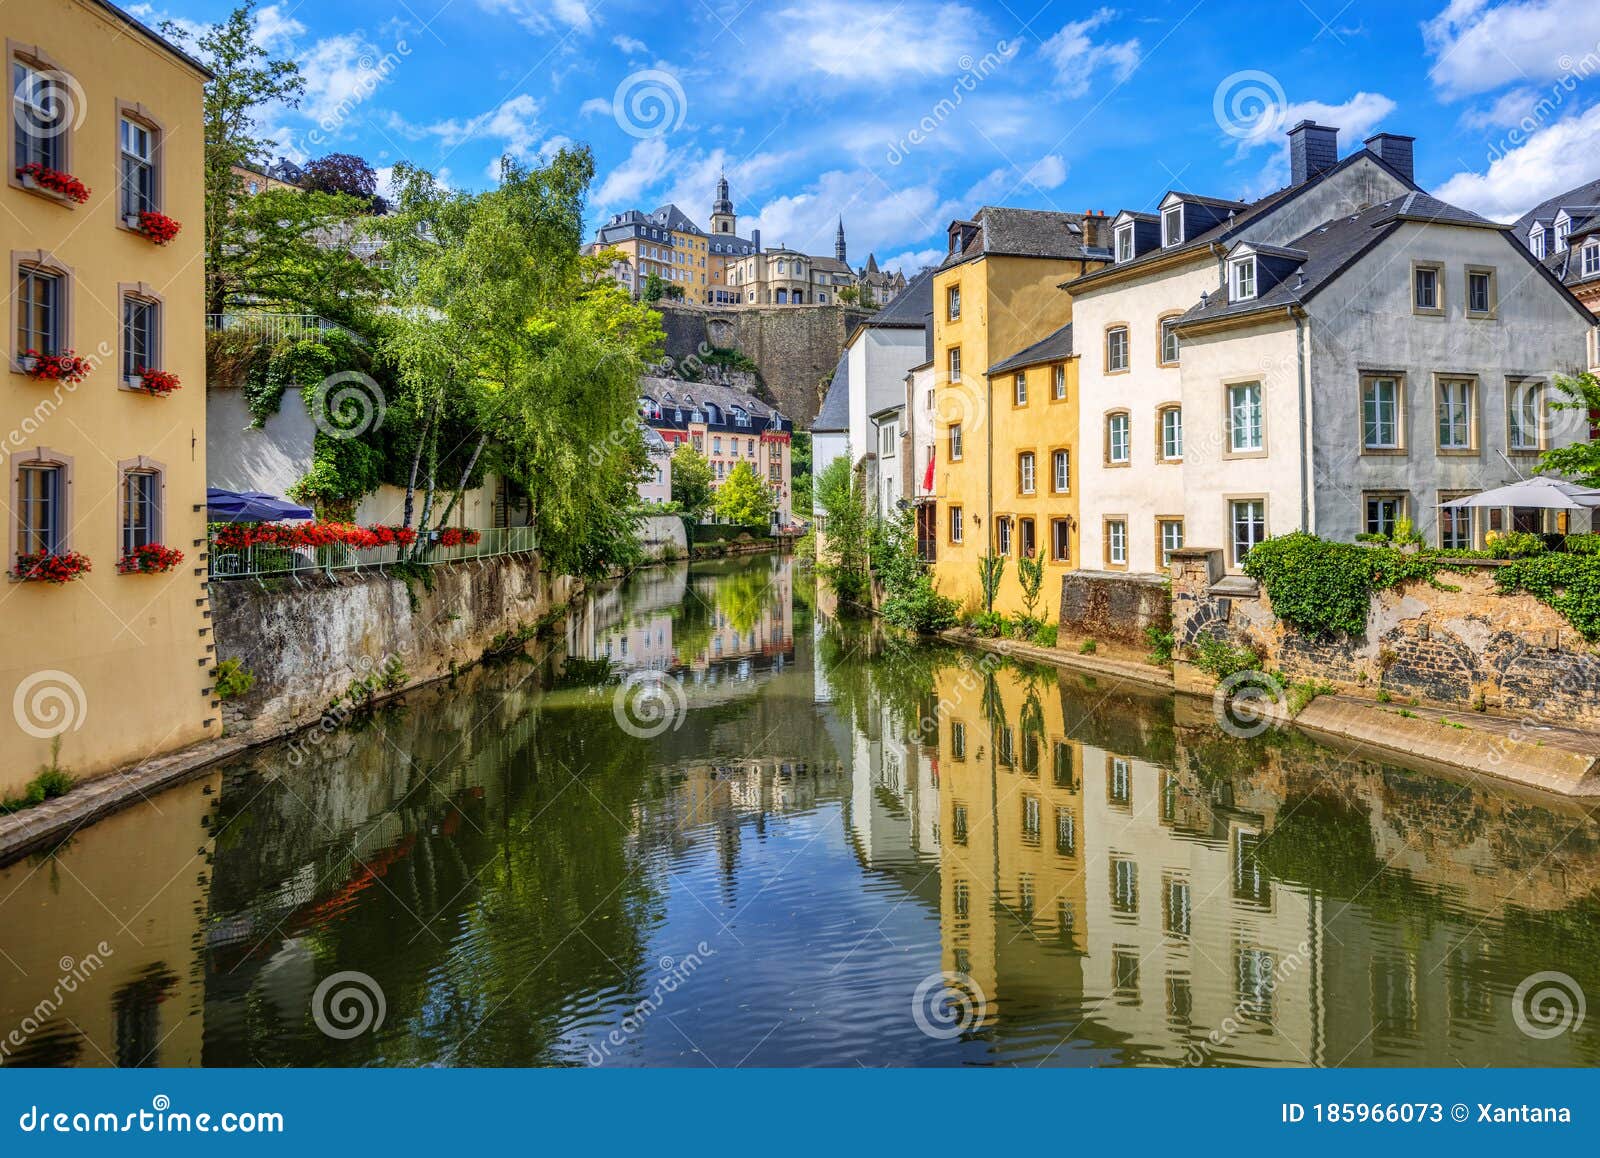 luxembourg city, grund quarter and the old town